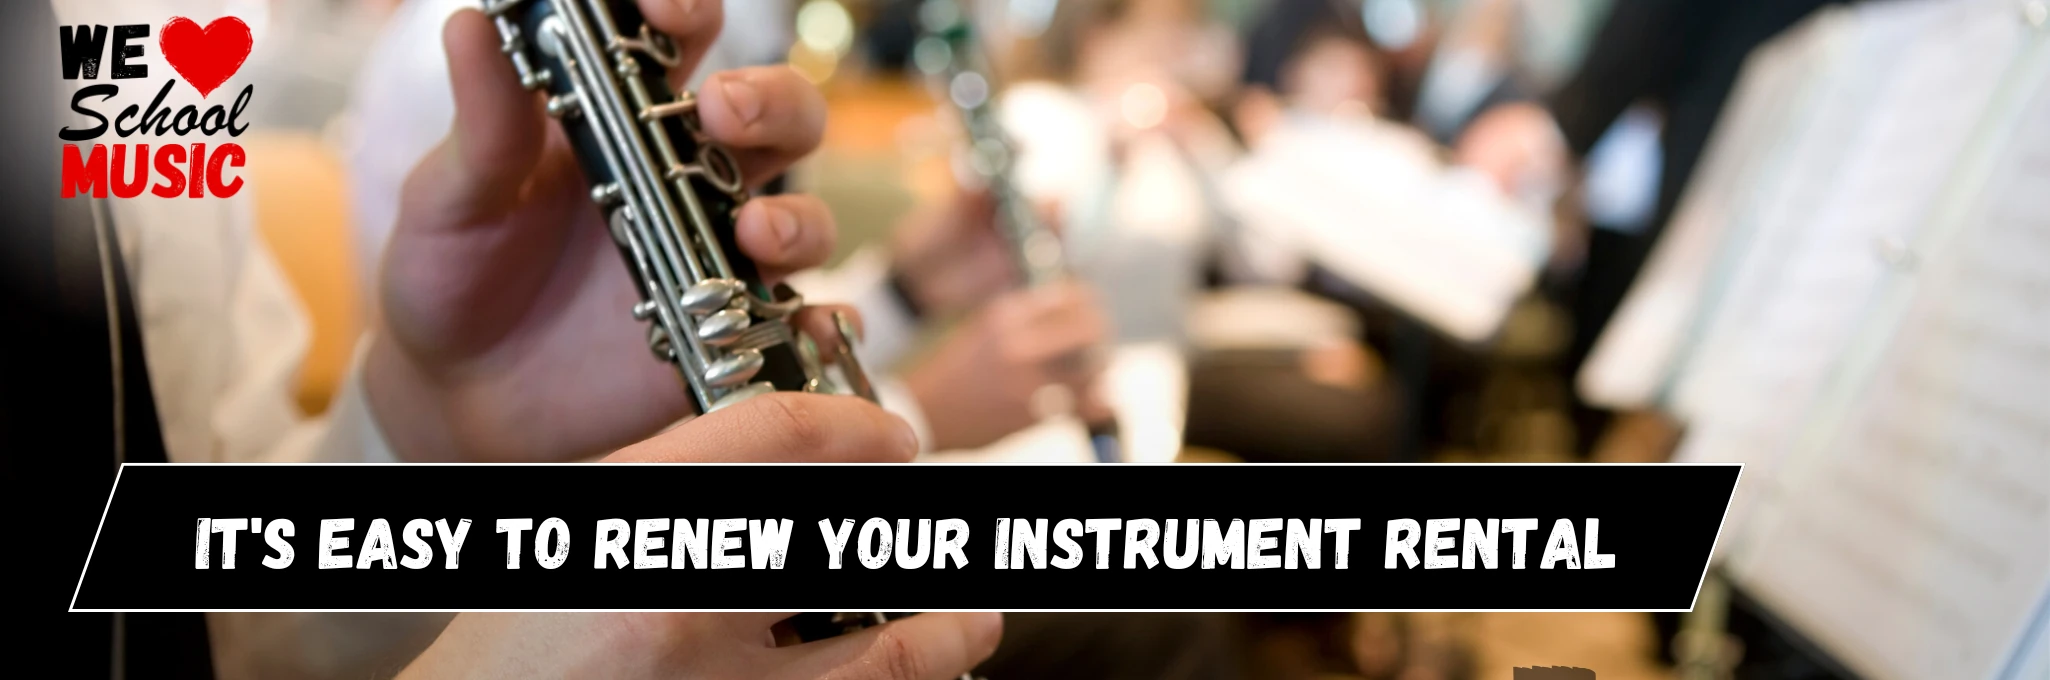 It’s easy to renew your school music band or orchestra instrument rental at The Magic Flute.